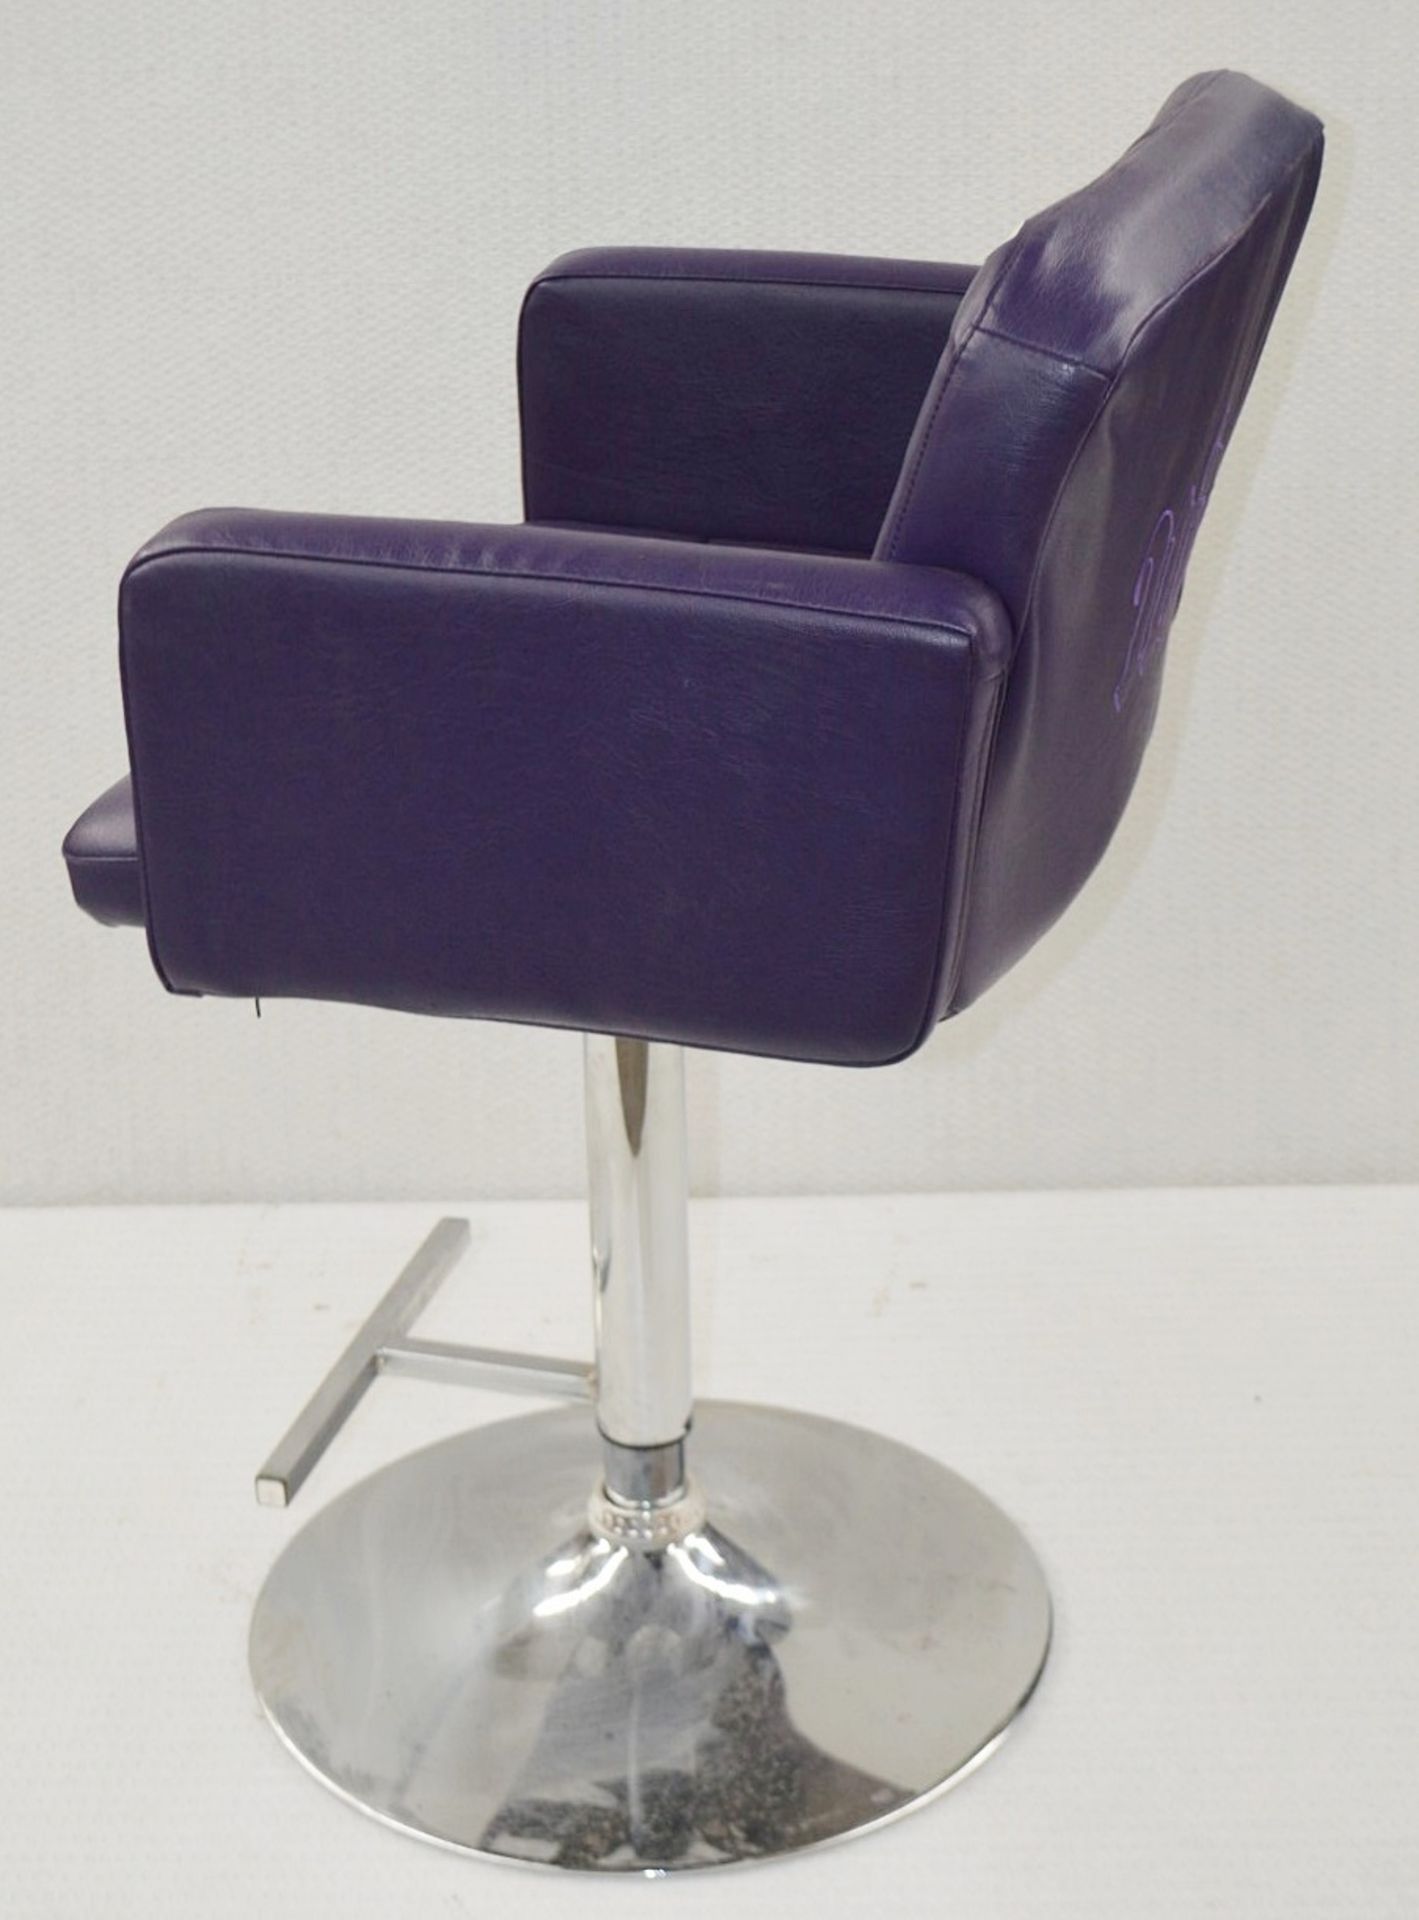 1 x URBAN DECAY Branded Gas-Lift Beauty Salon Swivel Chair With Foot Plate - Upholstered In Purple - Image 3 of 6